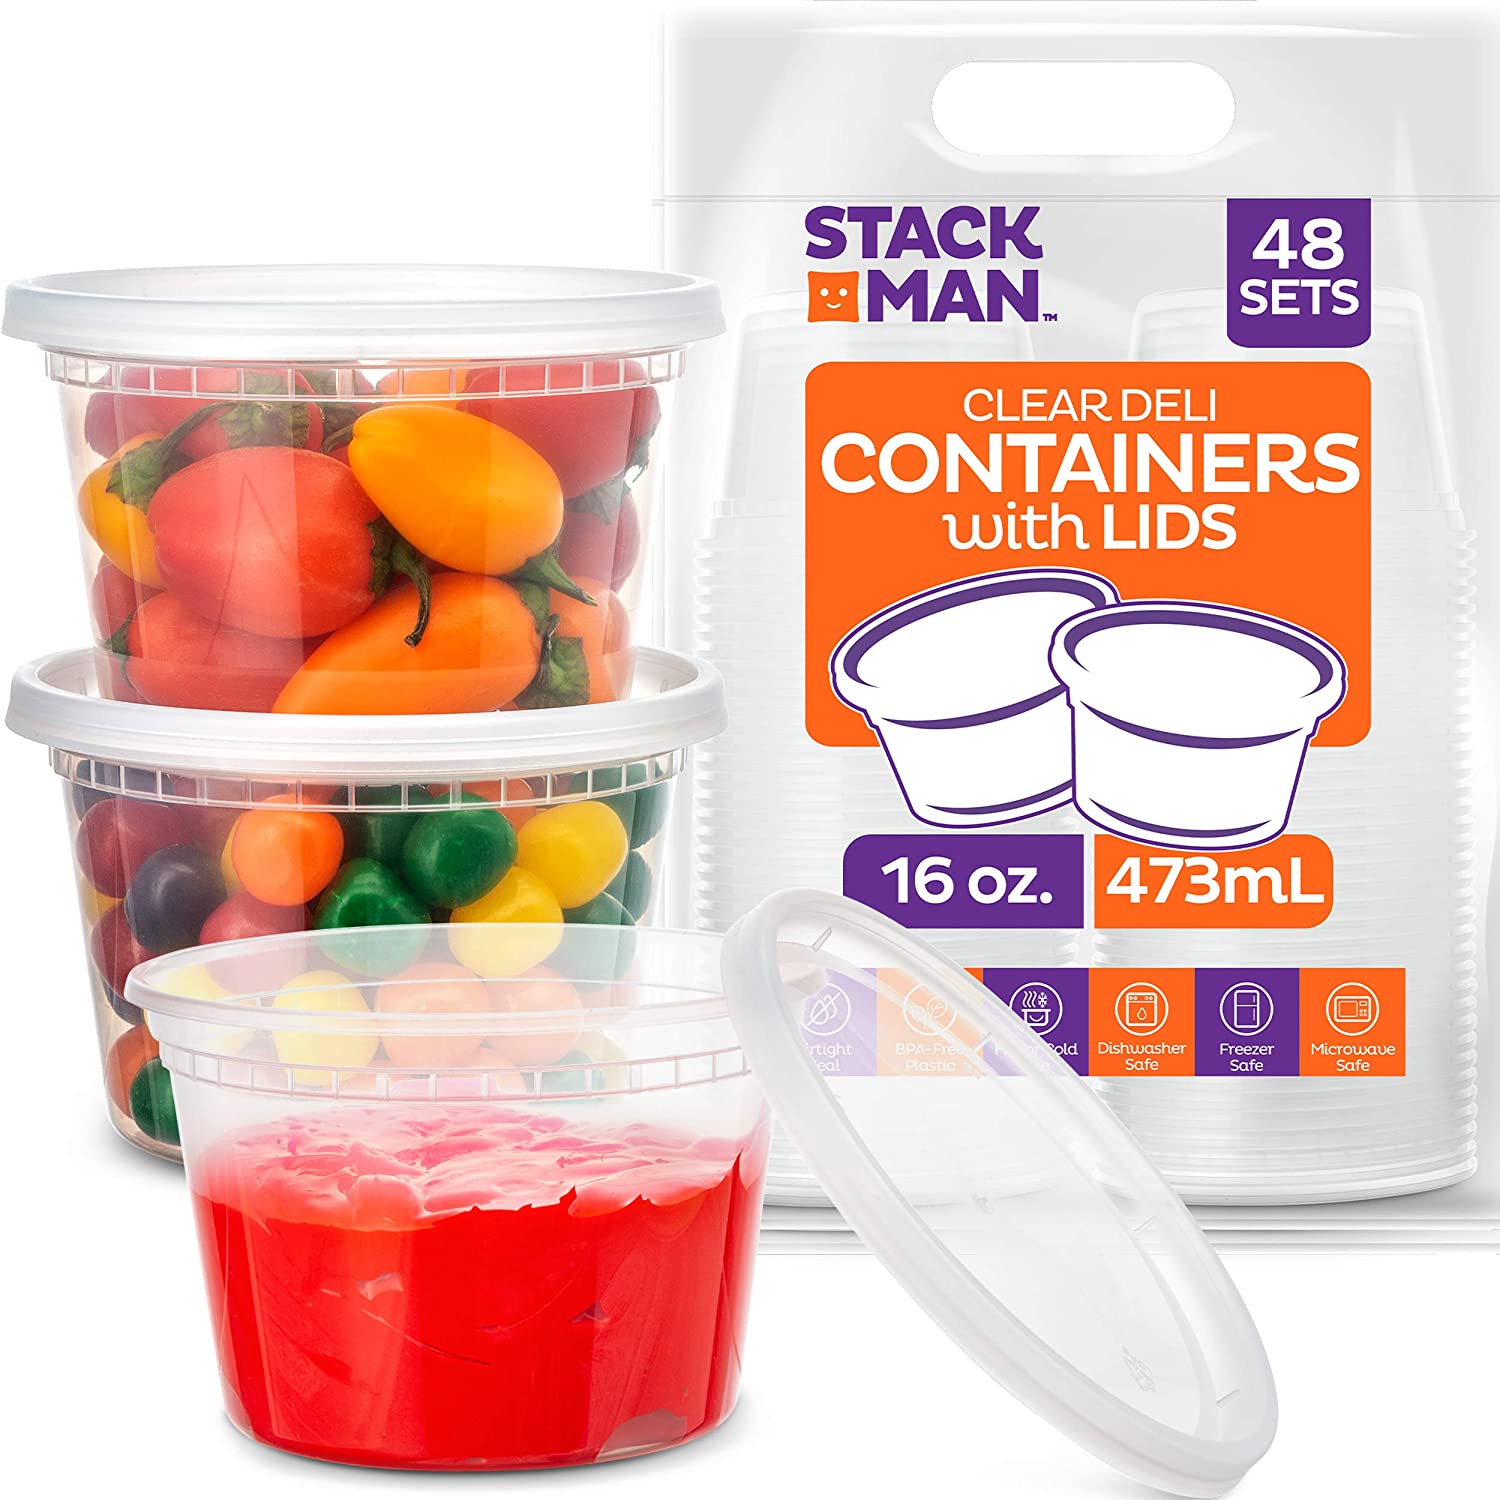 Stack Man Freezer Safe Plastic Soup Containers With Lids, 48-Piece